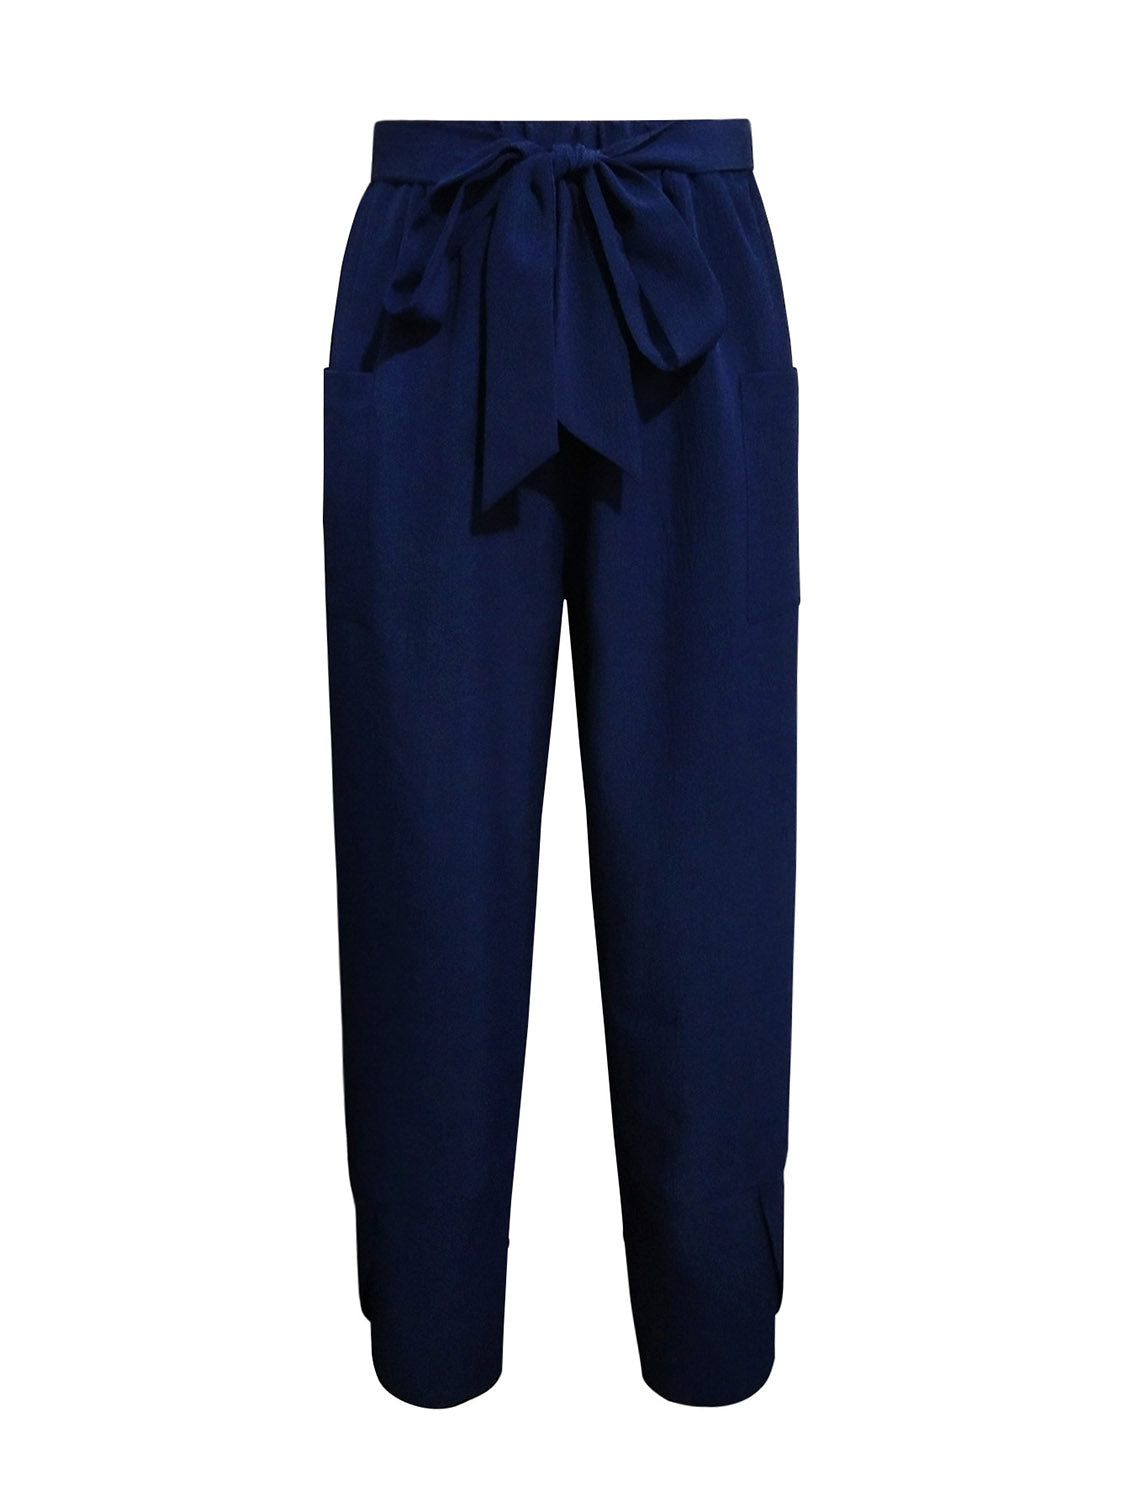 Tie Front Pants with Pockets